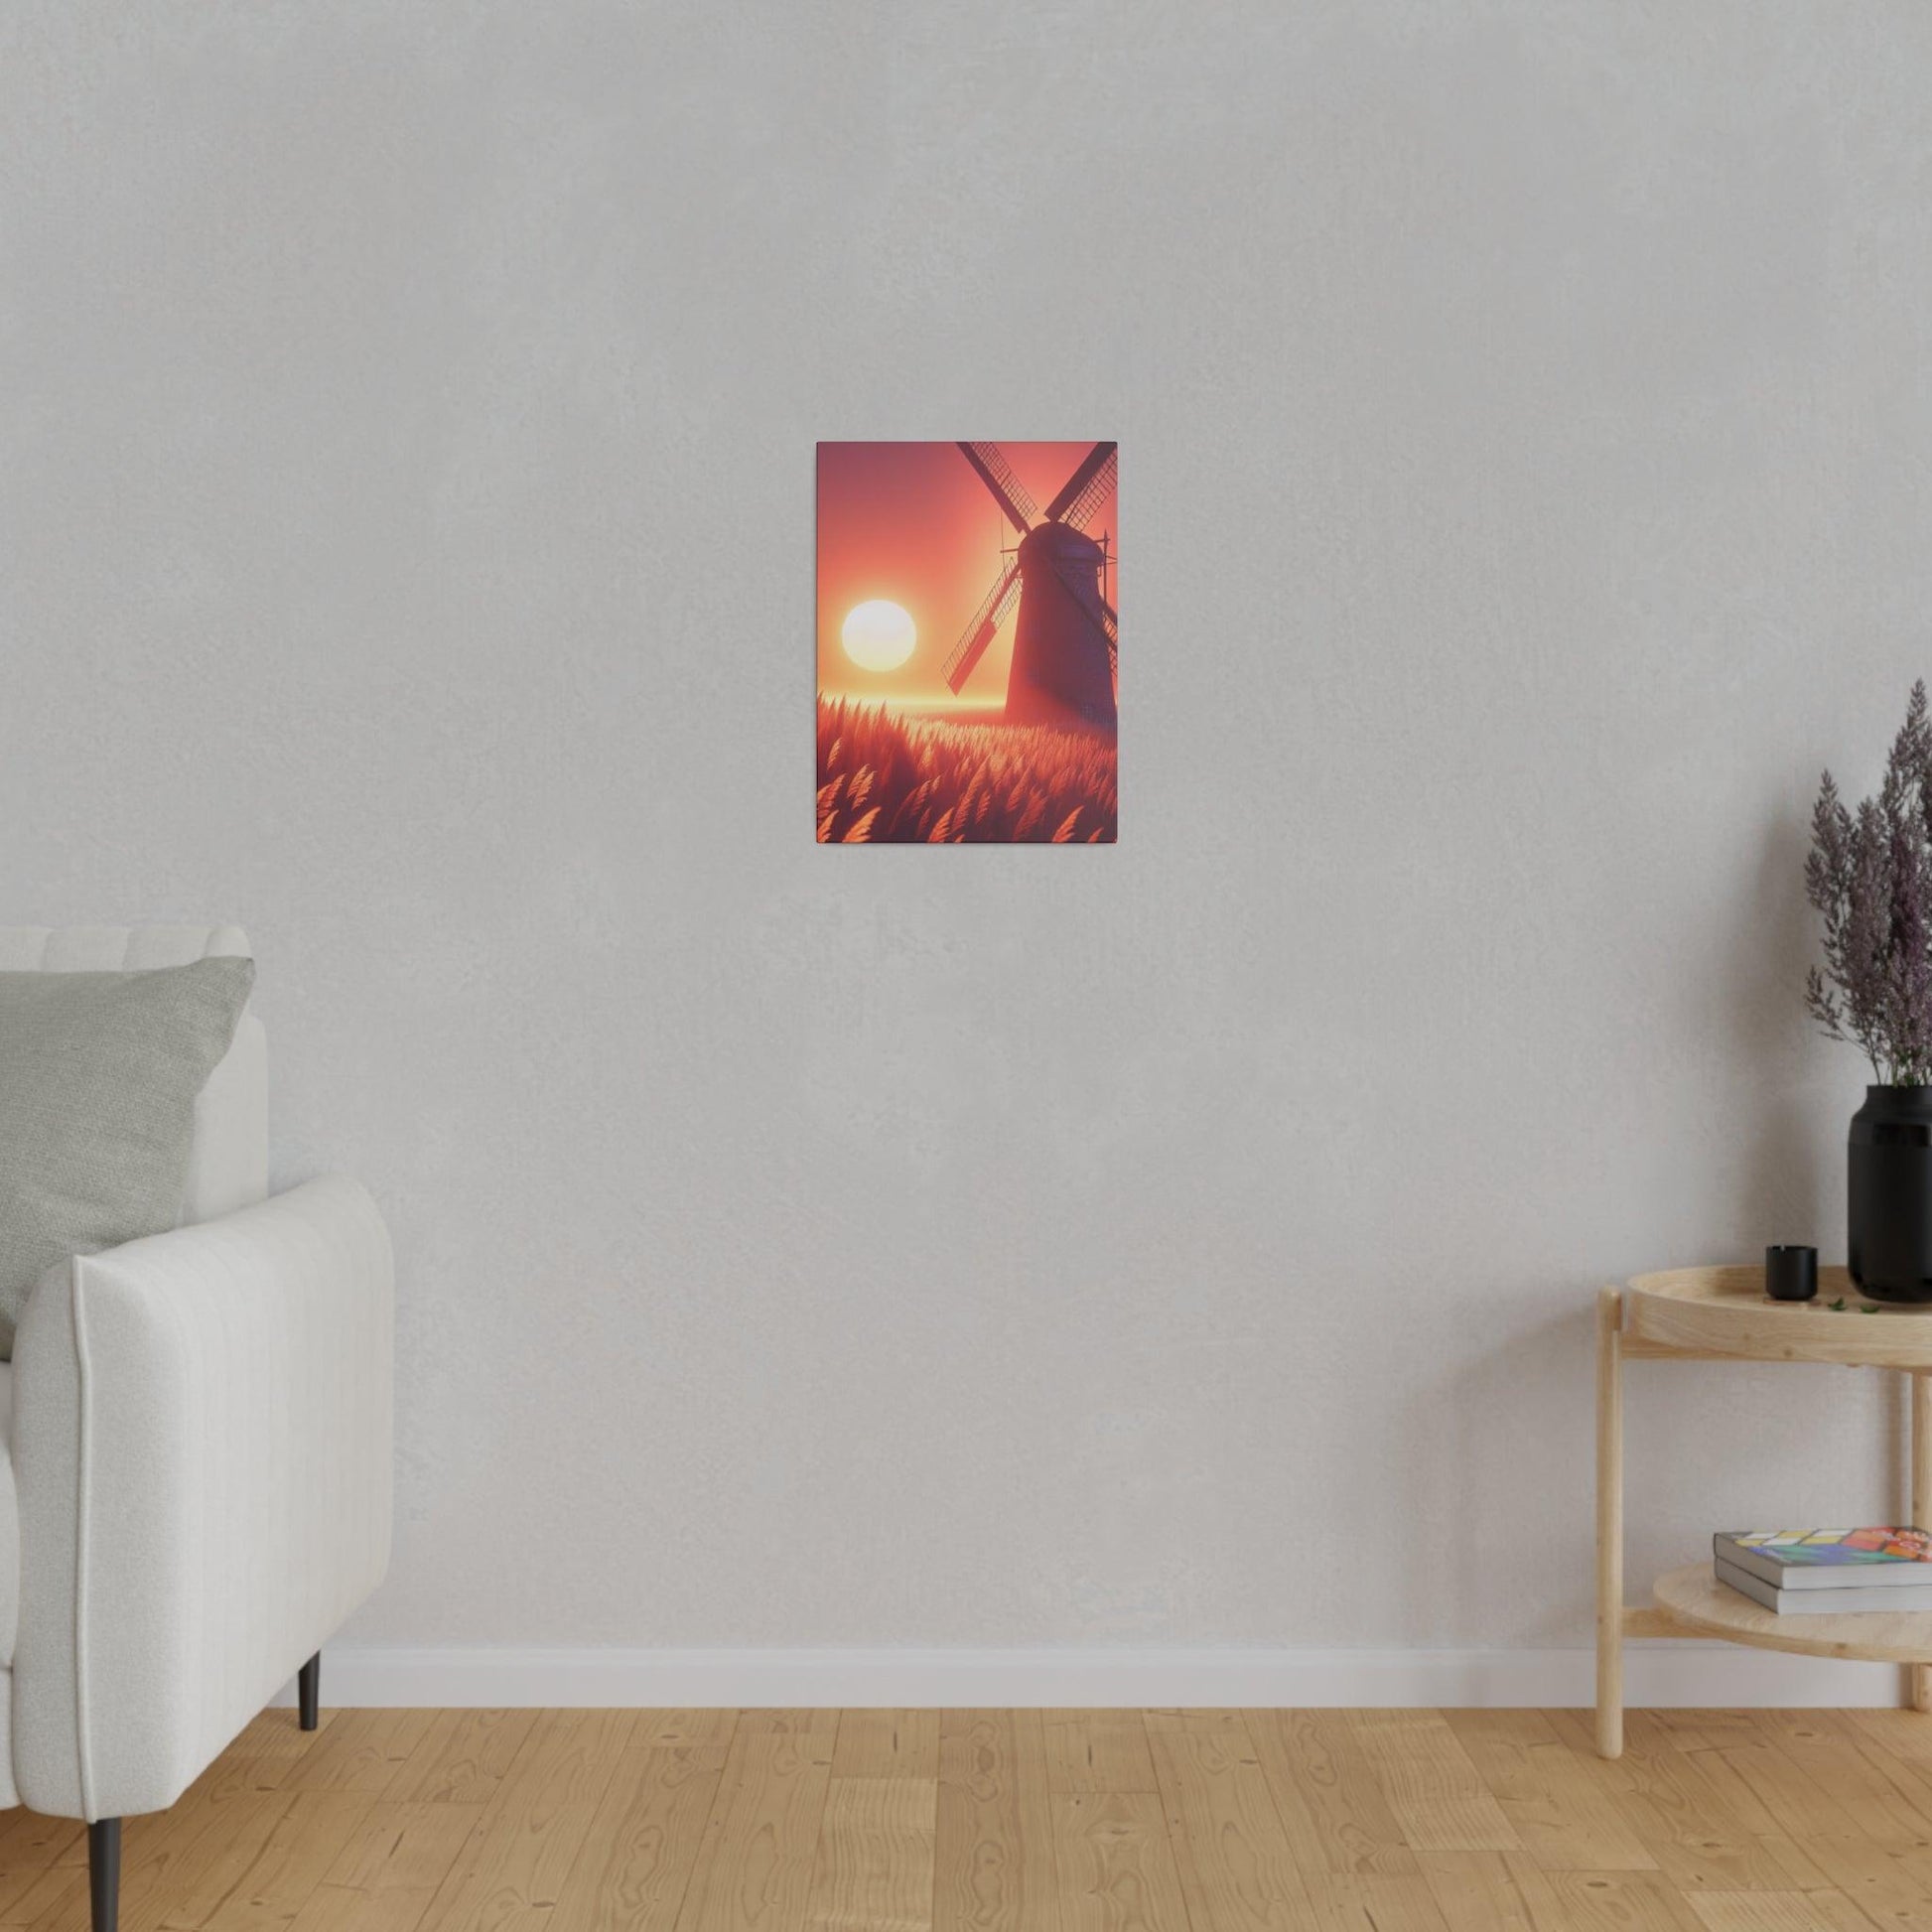 "Windmill Whispers: Vintage-Inspired Canvas Wall Art" - The Alice Gallery